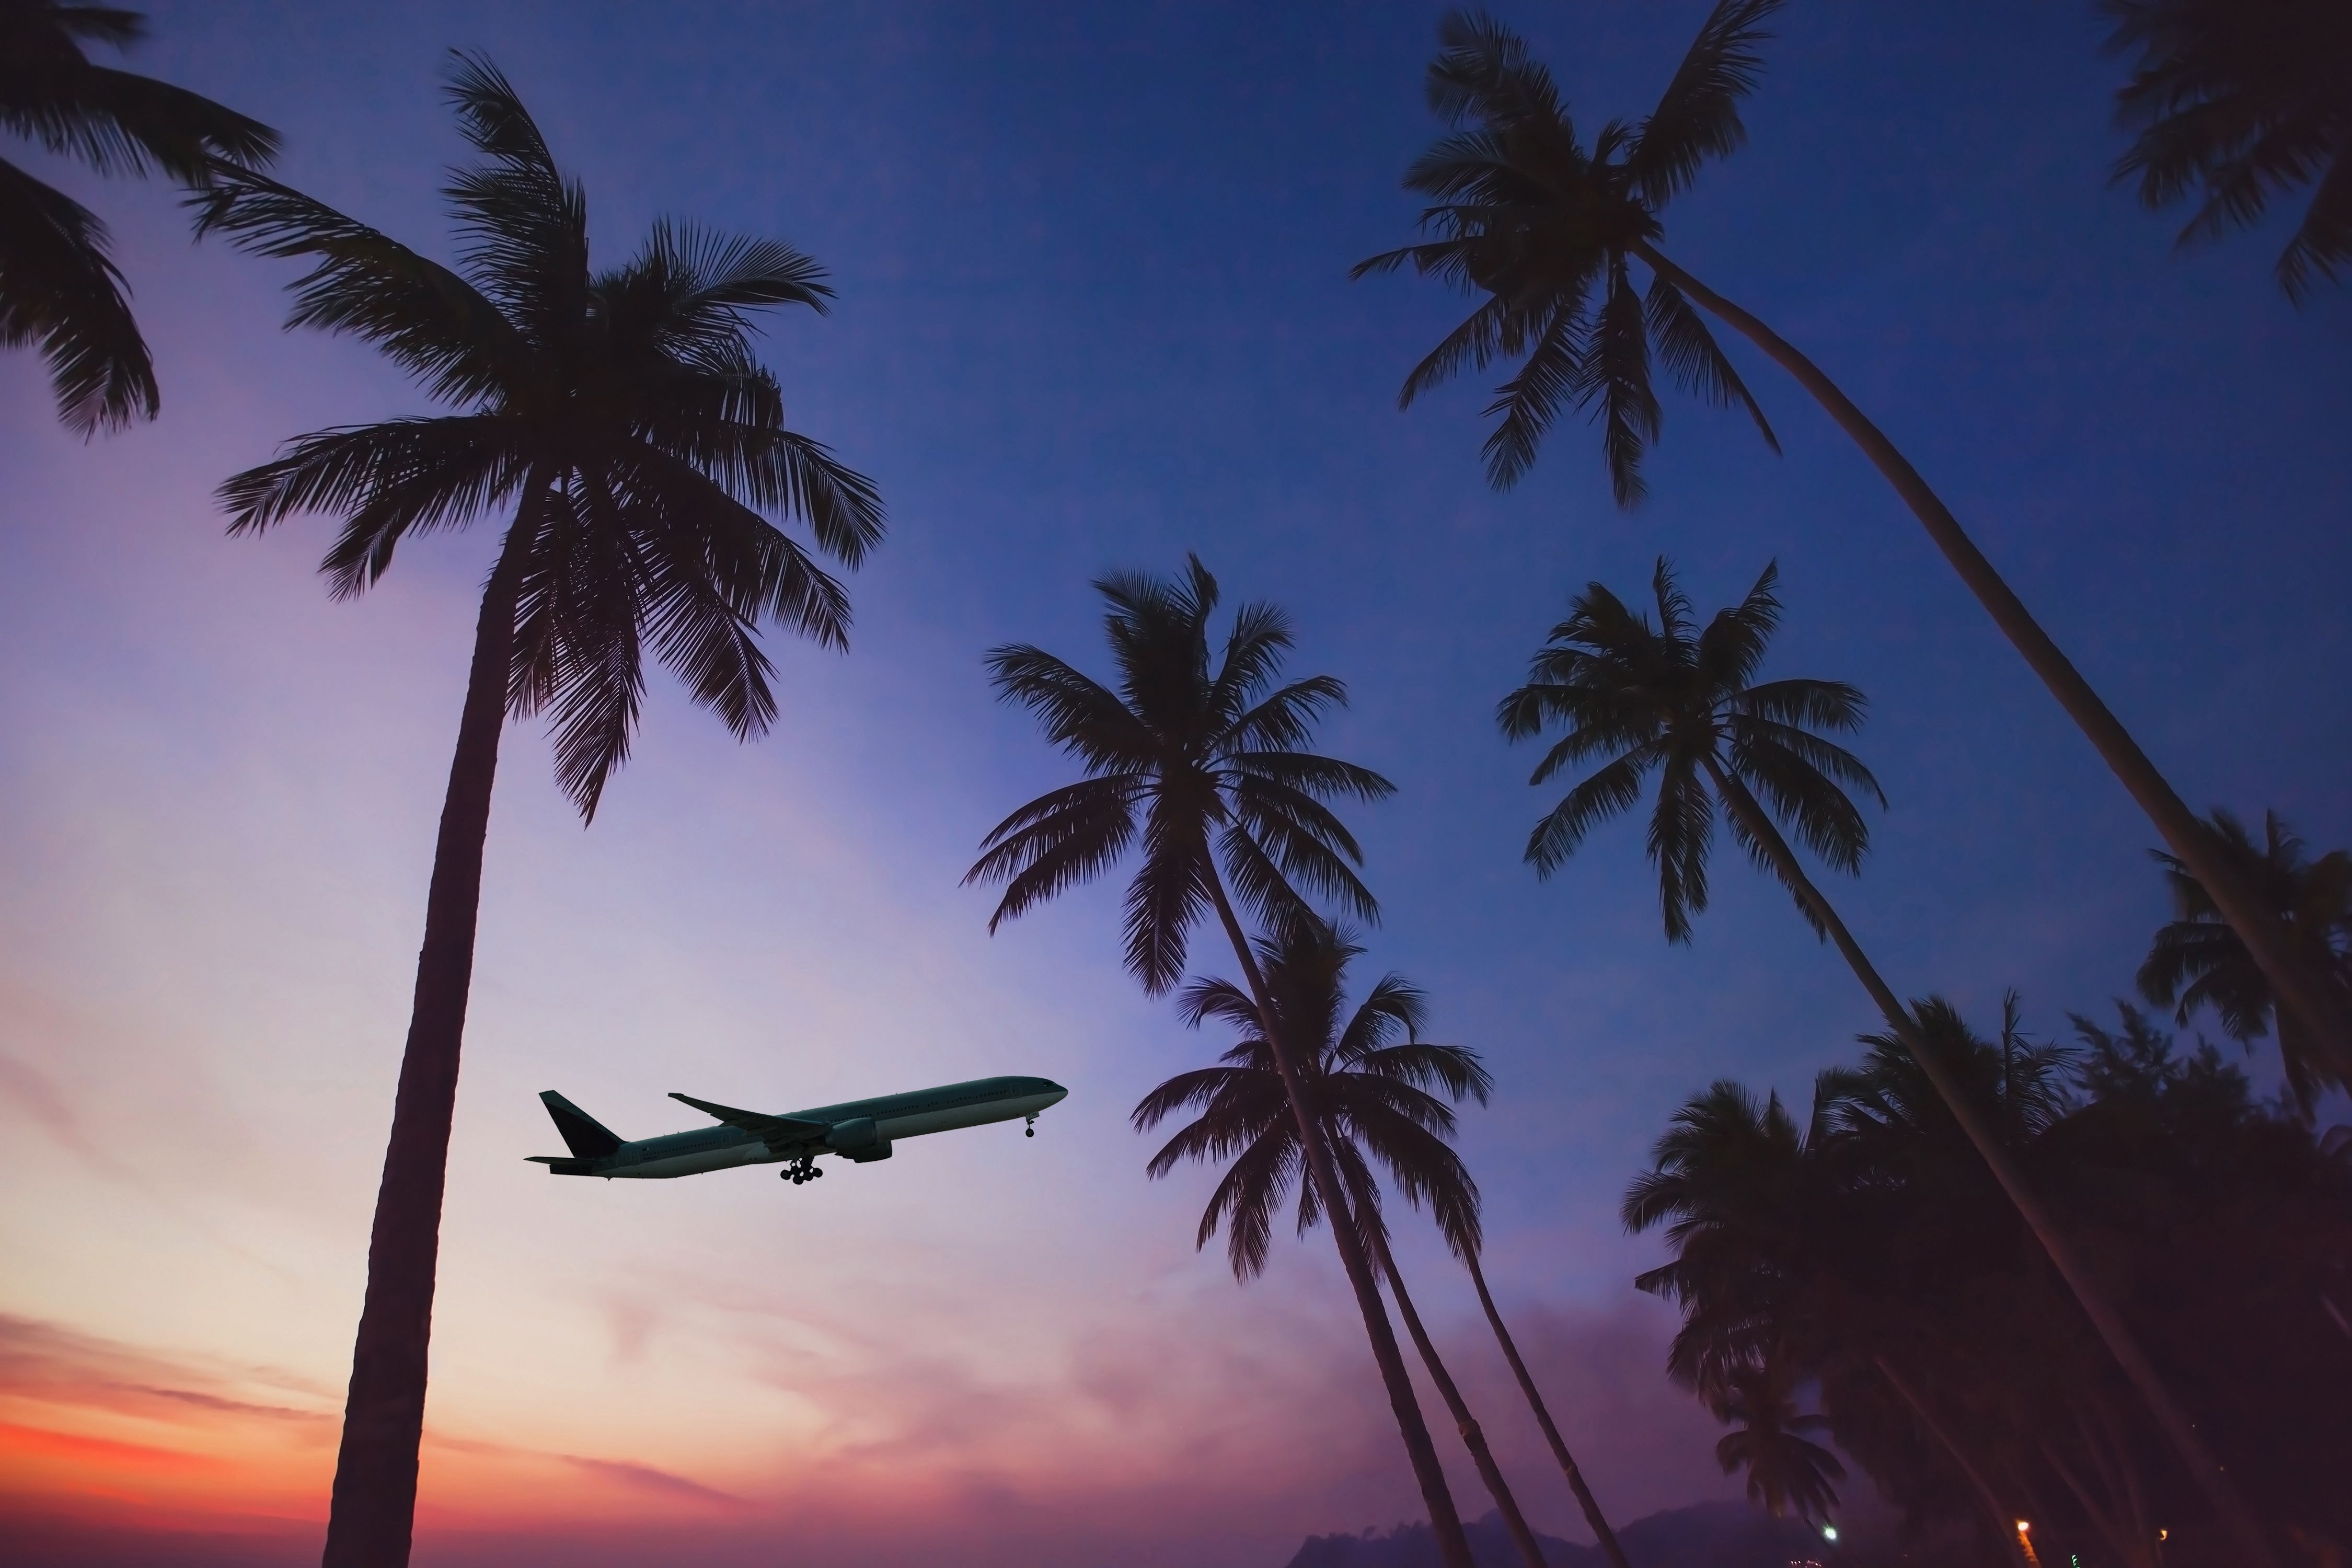 Airplane flying over palm trees.